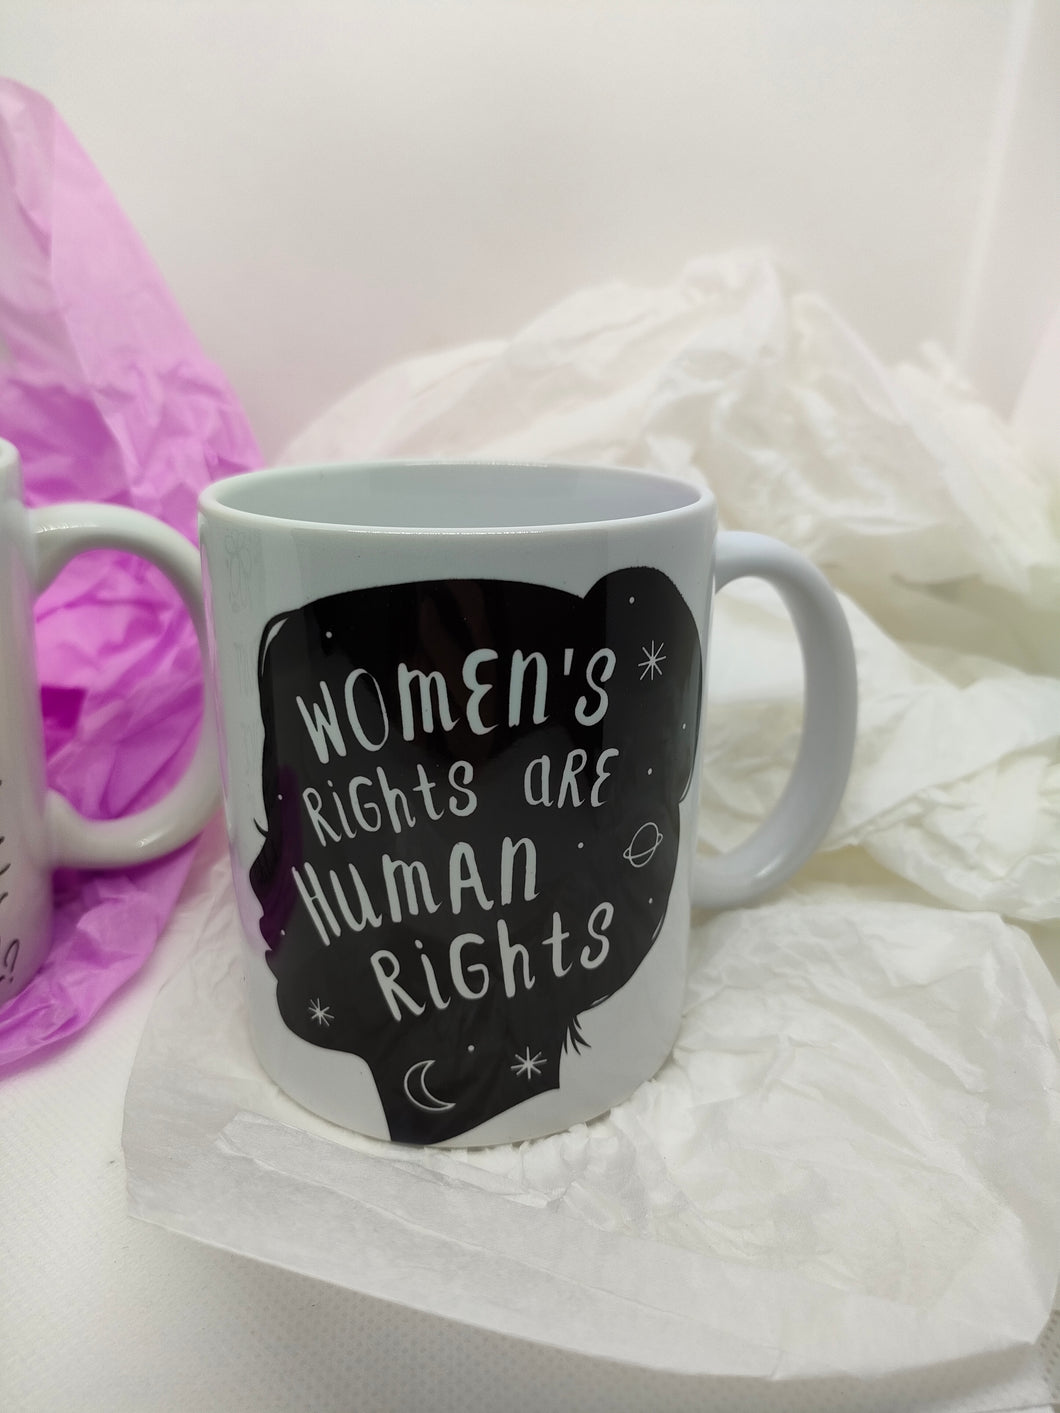 Women's rights are Human rights mug